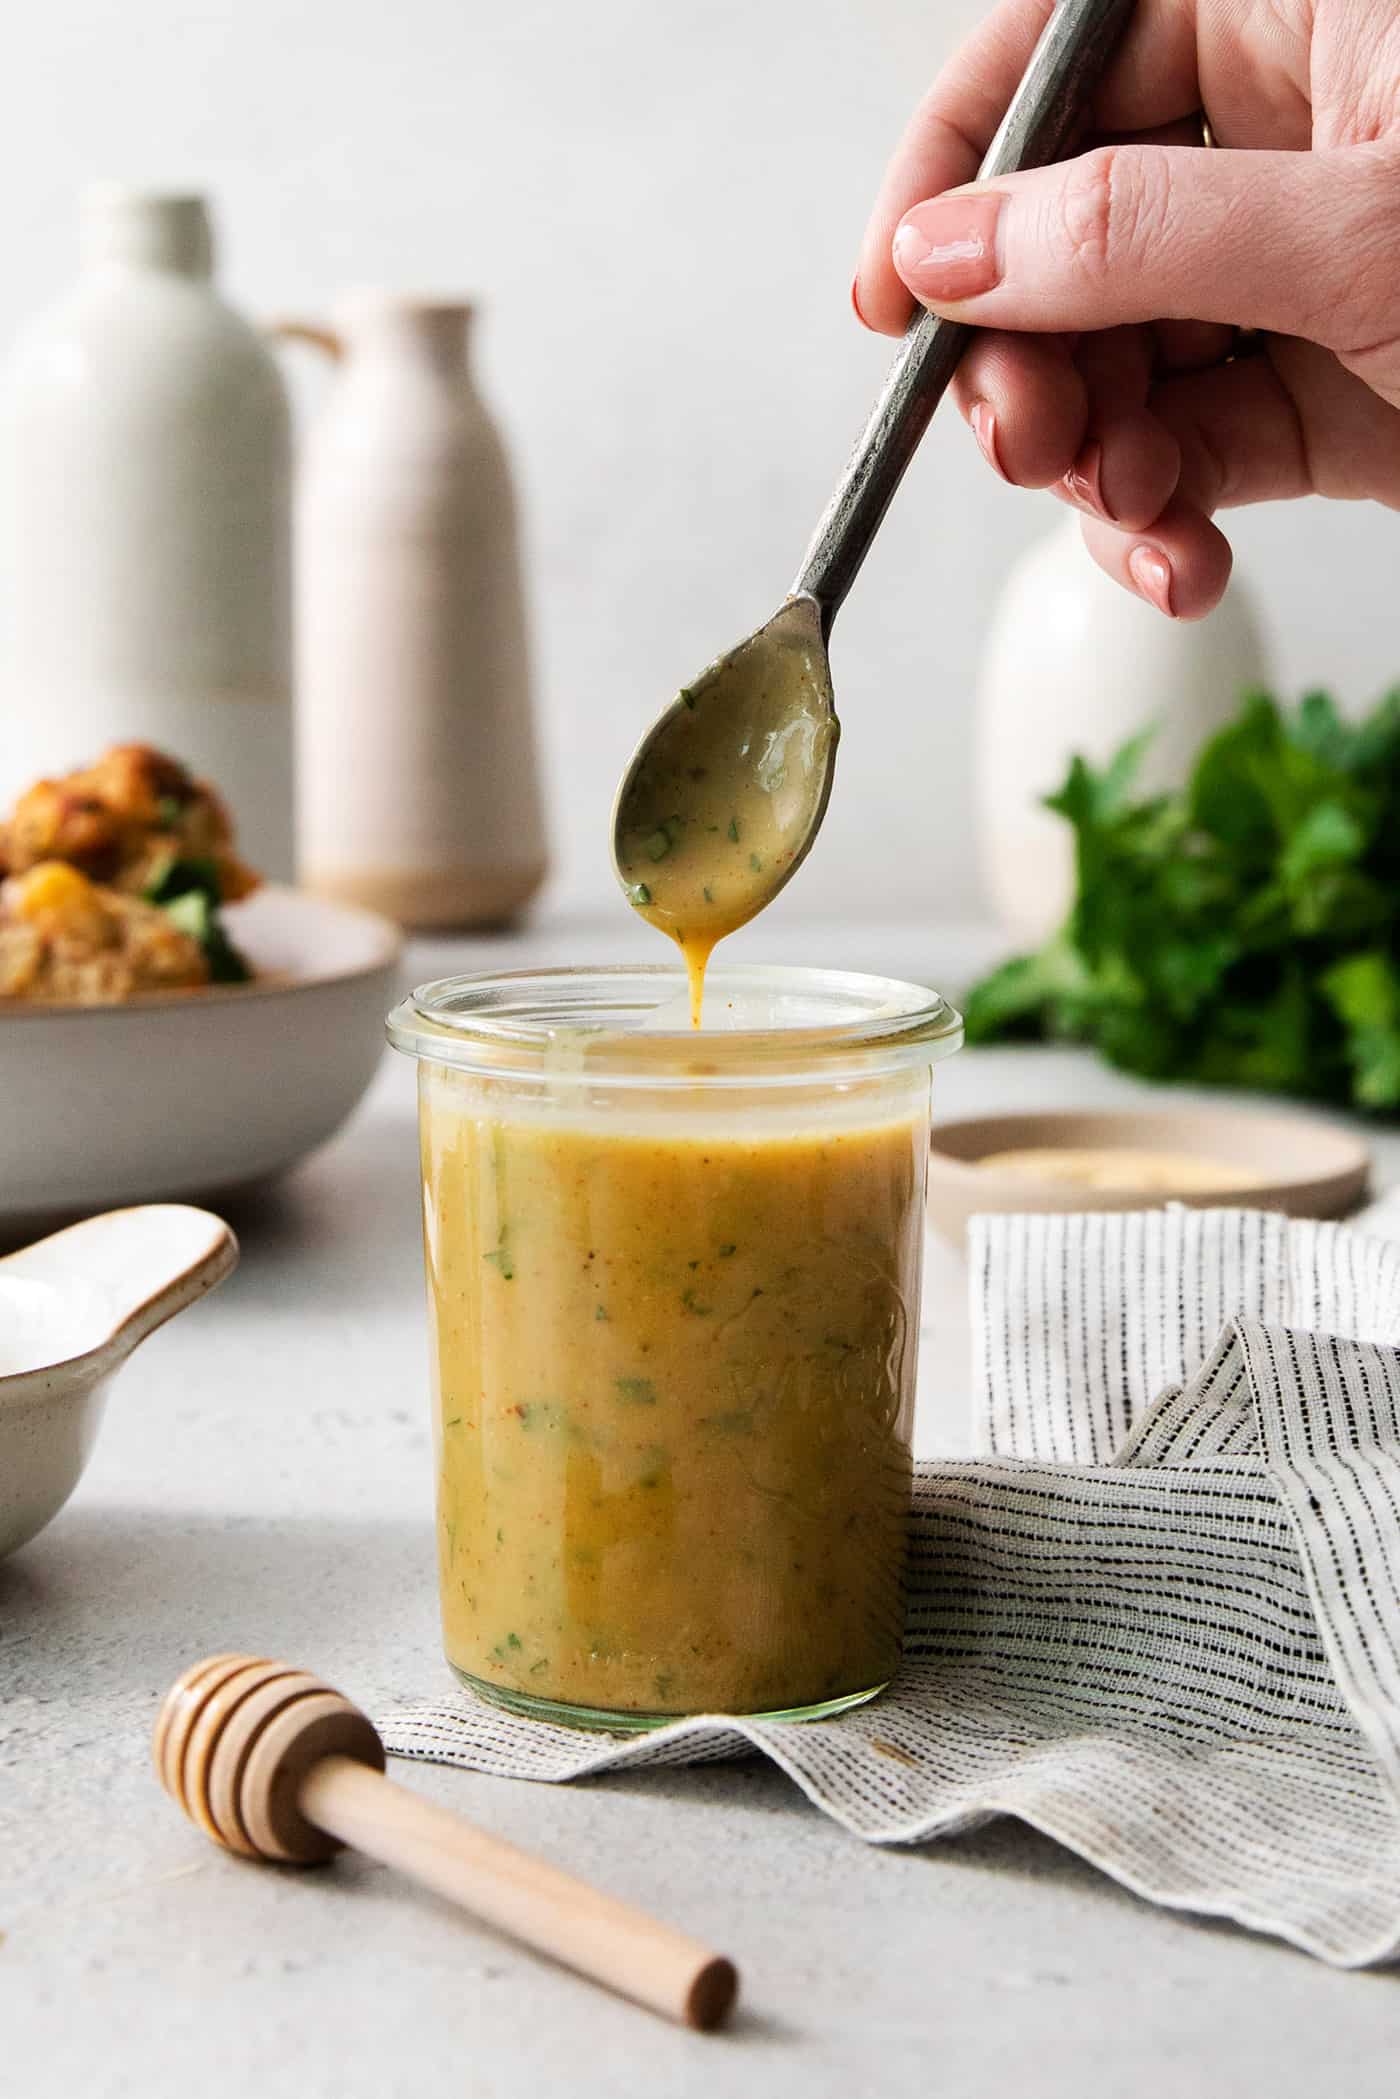 A hand dips a spoon into a glass jar of honey mustard dip